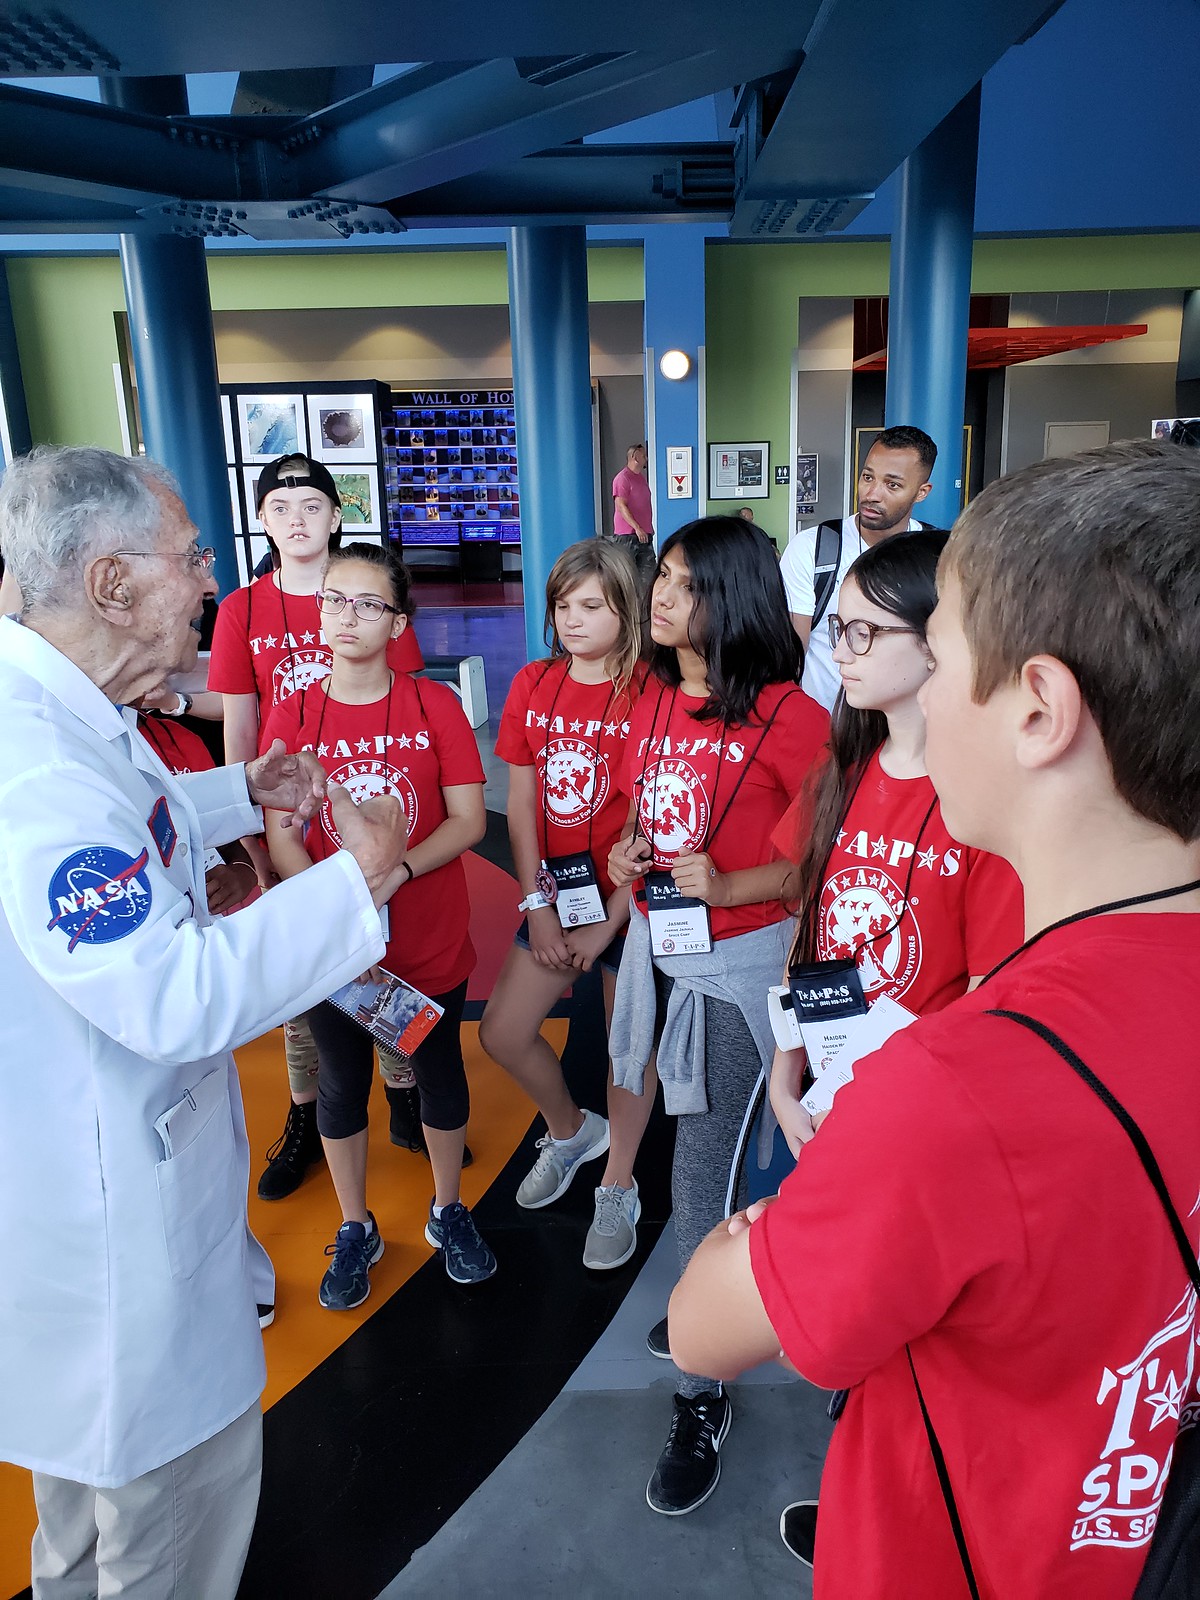 2019_YP_Space Camp 35